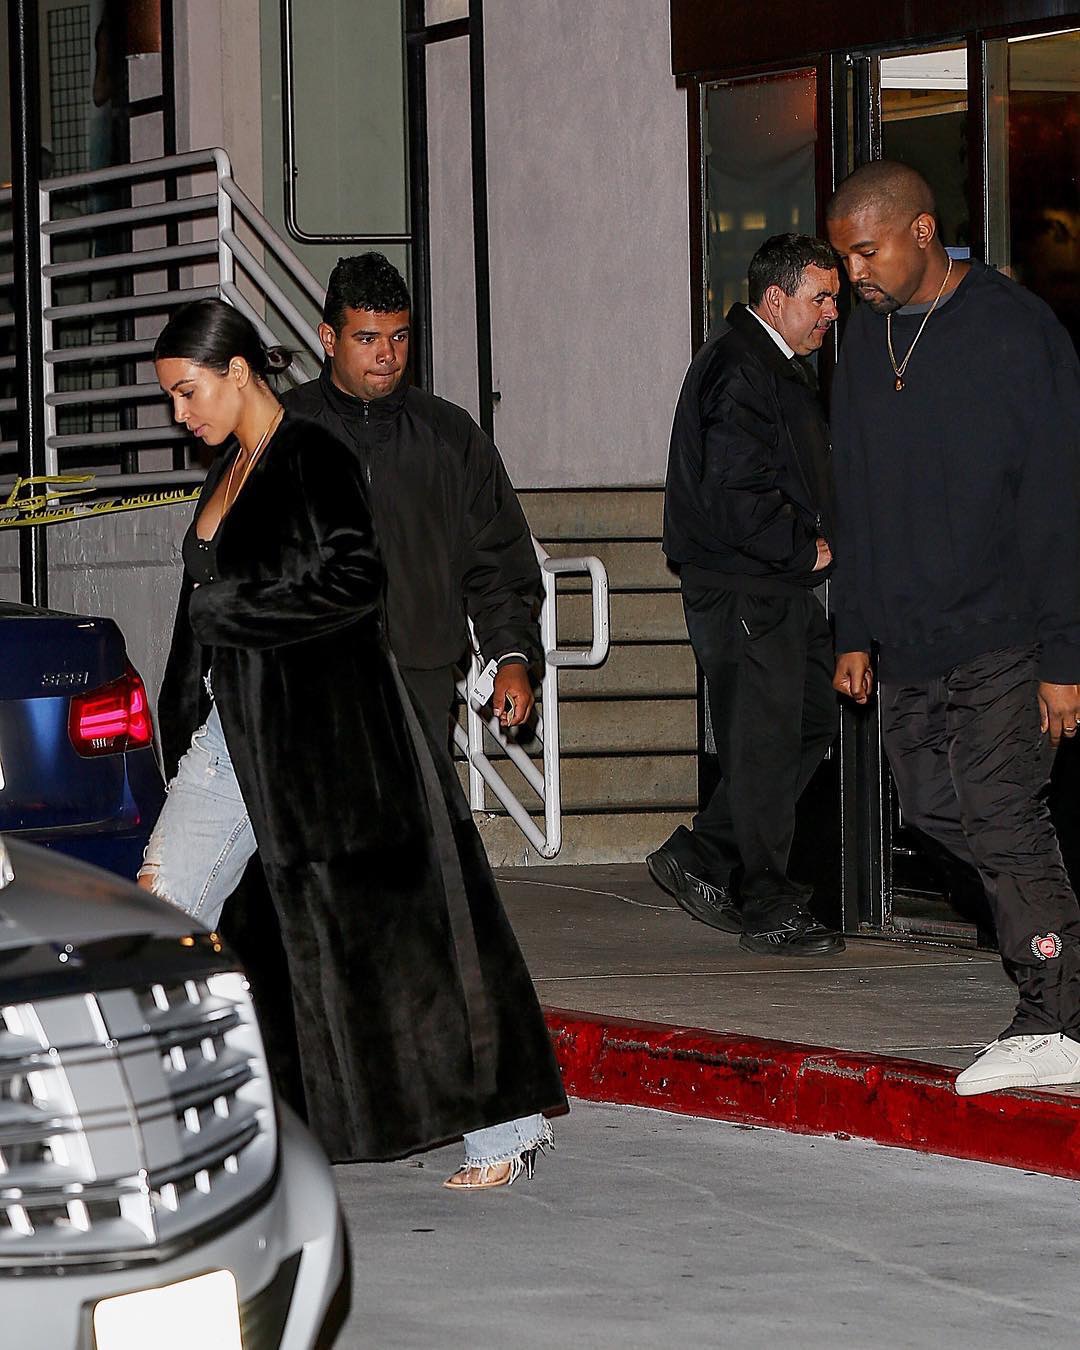 SPOTTED: Kanye West In Adidas Calabasas Yeezy Pants And Sneakers